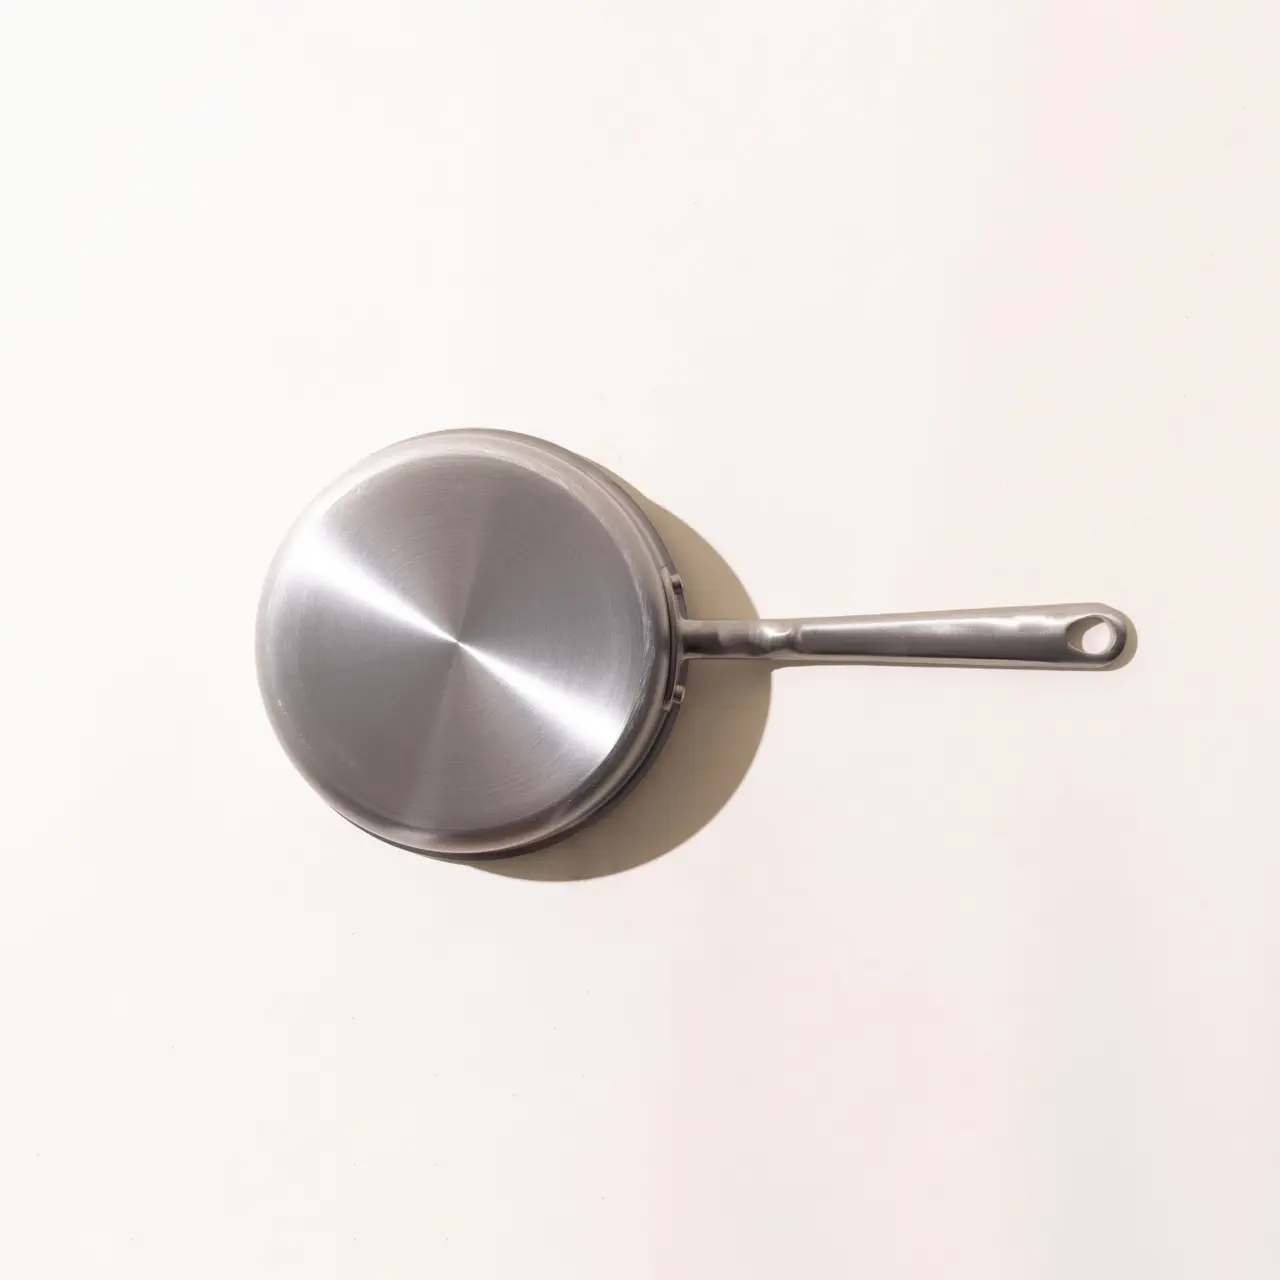 A stainless steel frying pan displayed against a light background.